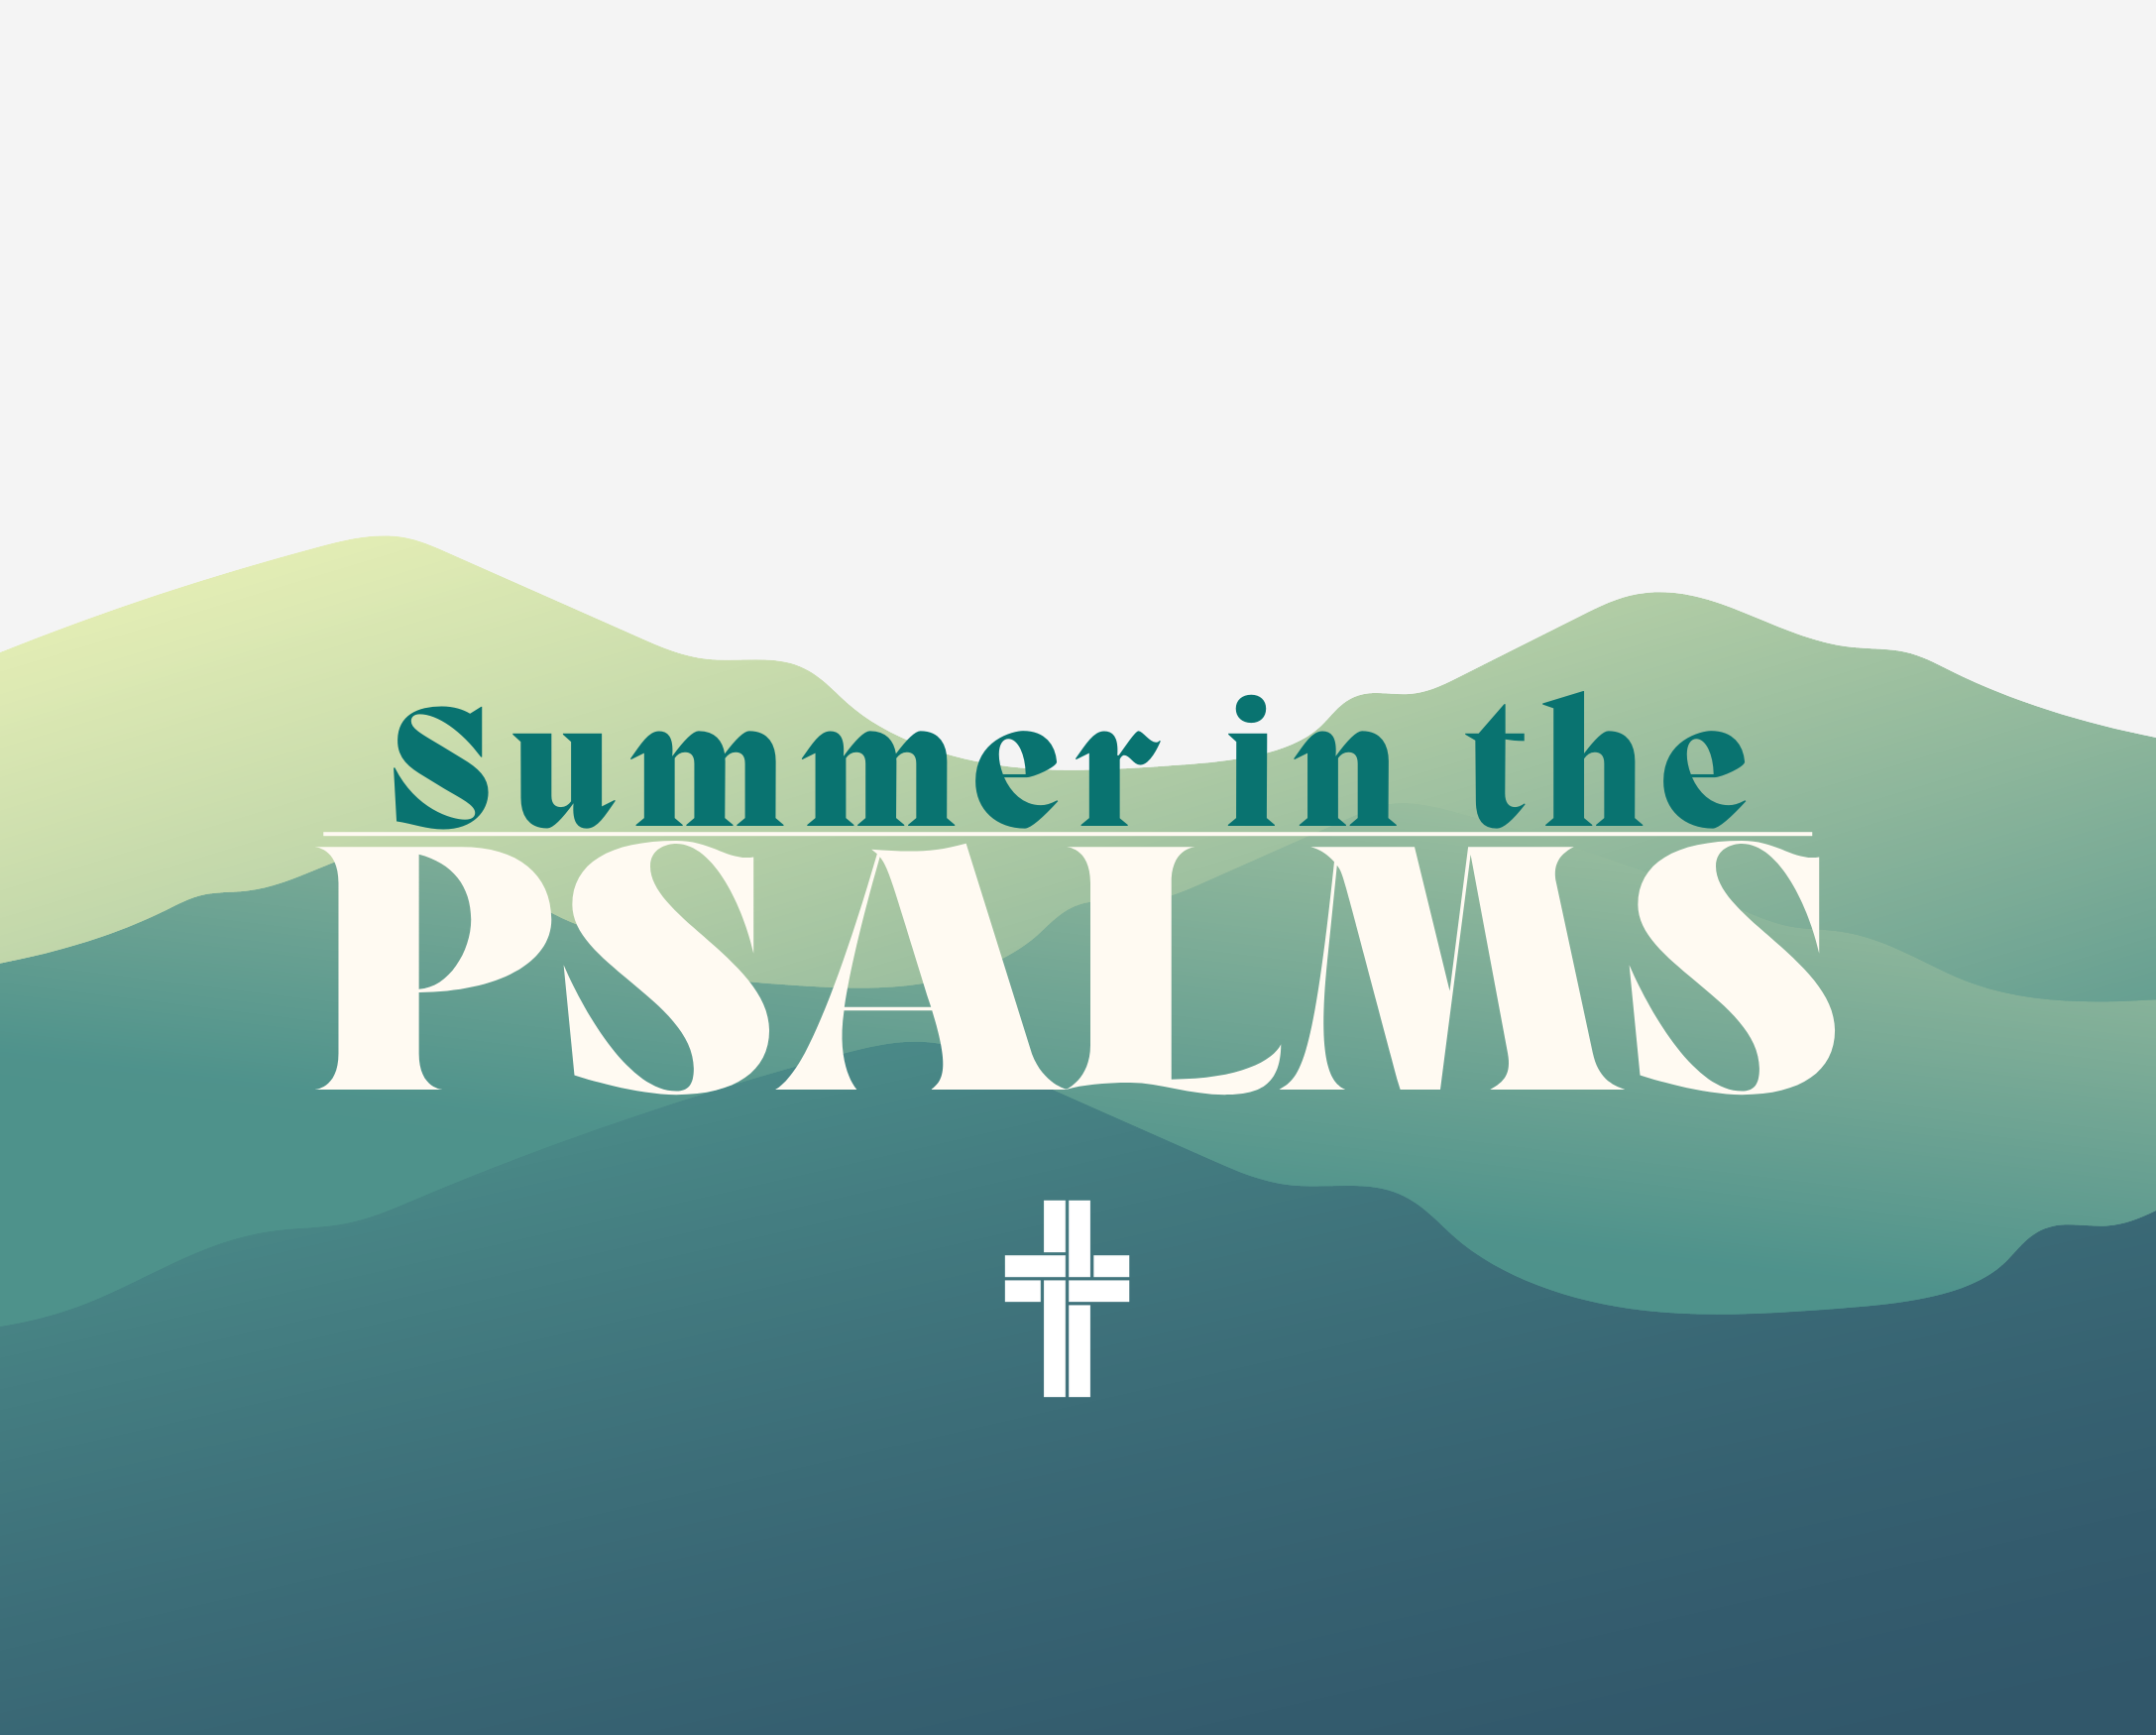 Summer in the Psalms: Fork in the Road